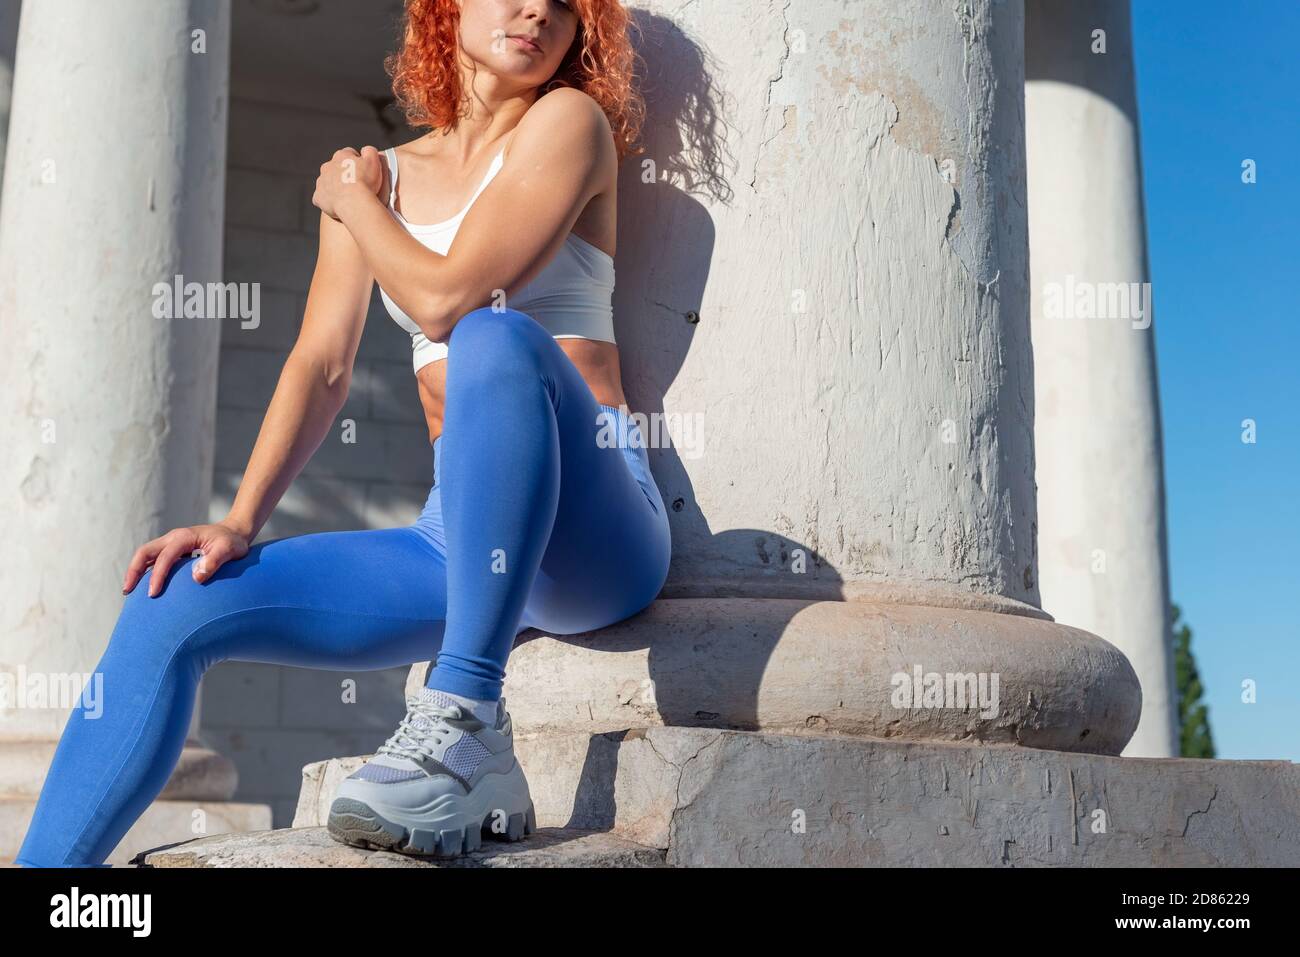 red-haired woman athlete, thirty-six years old, in sports leggings